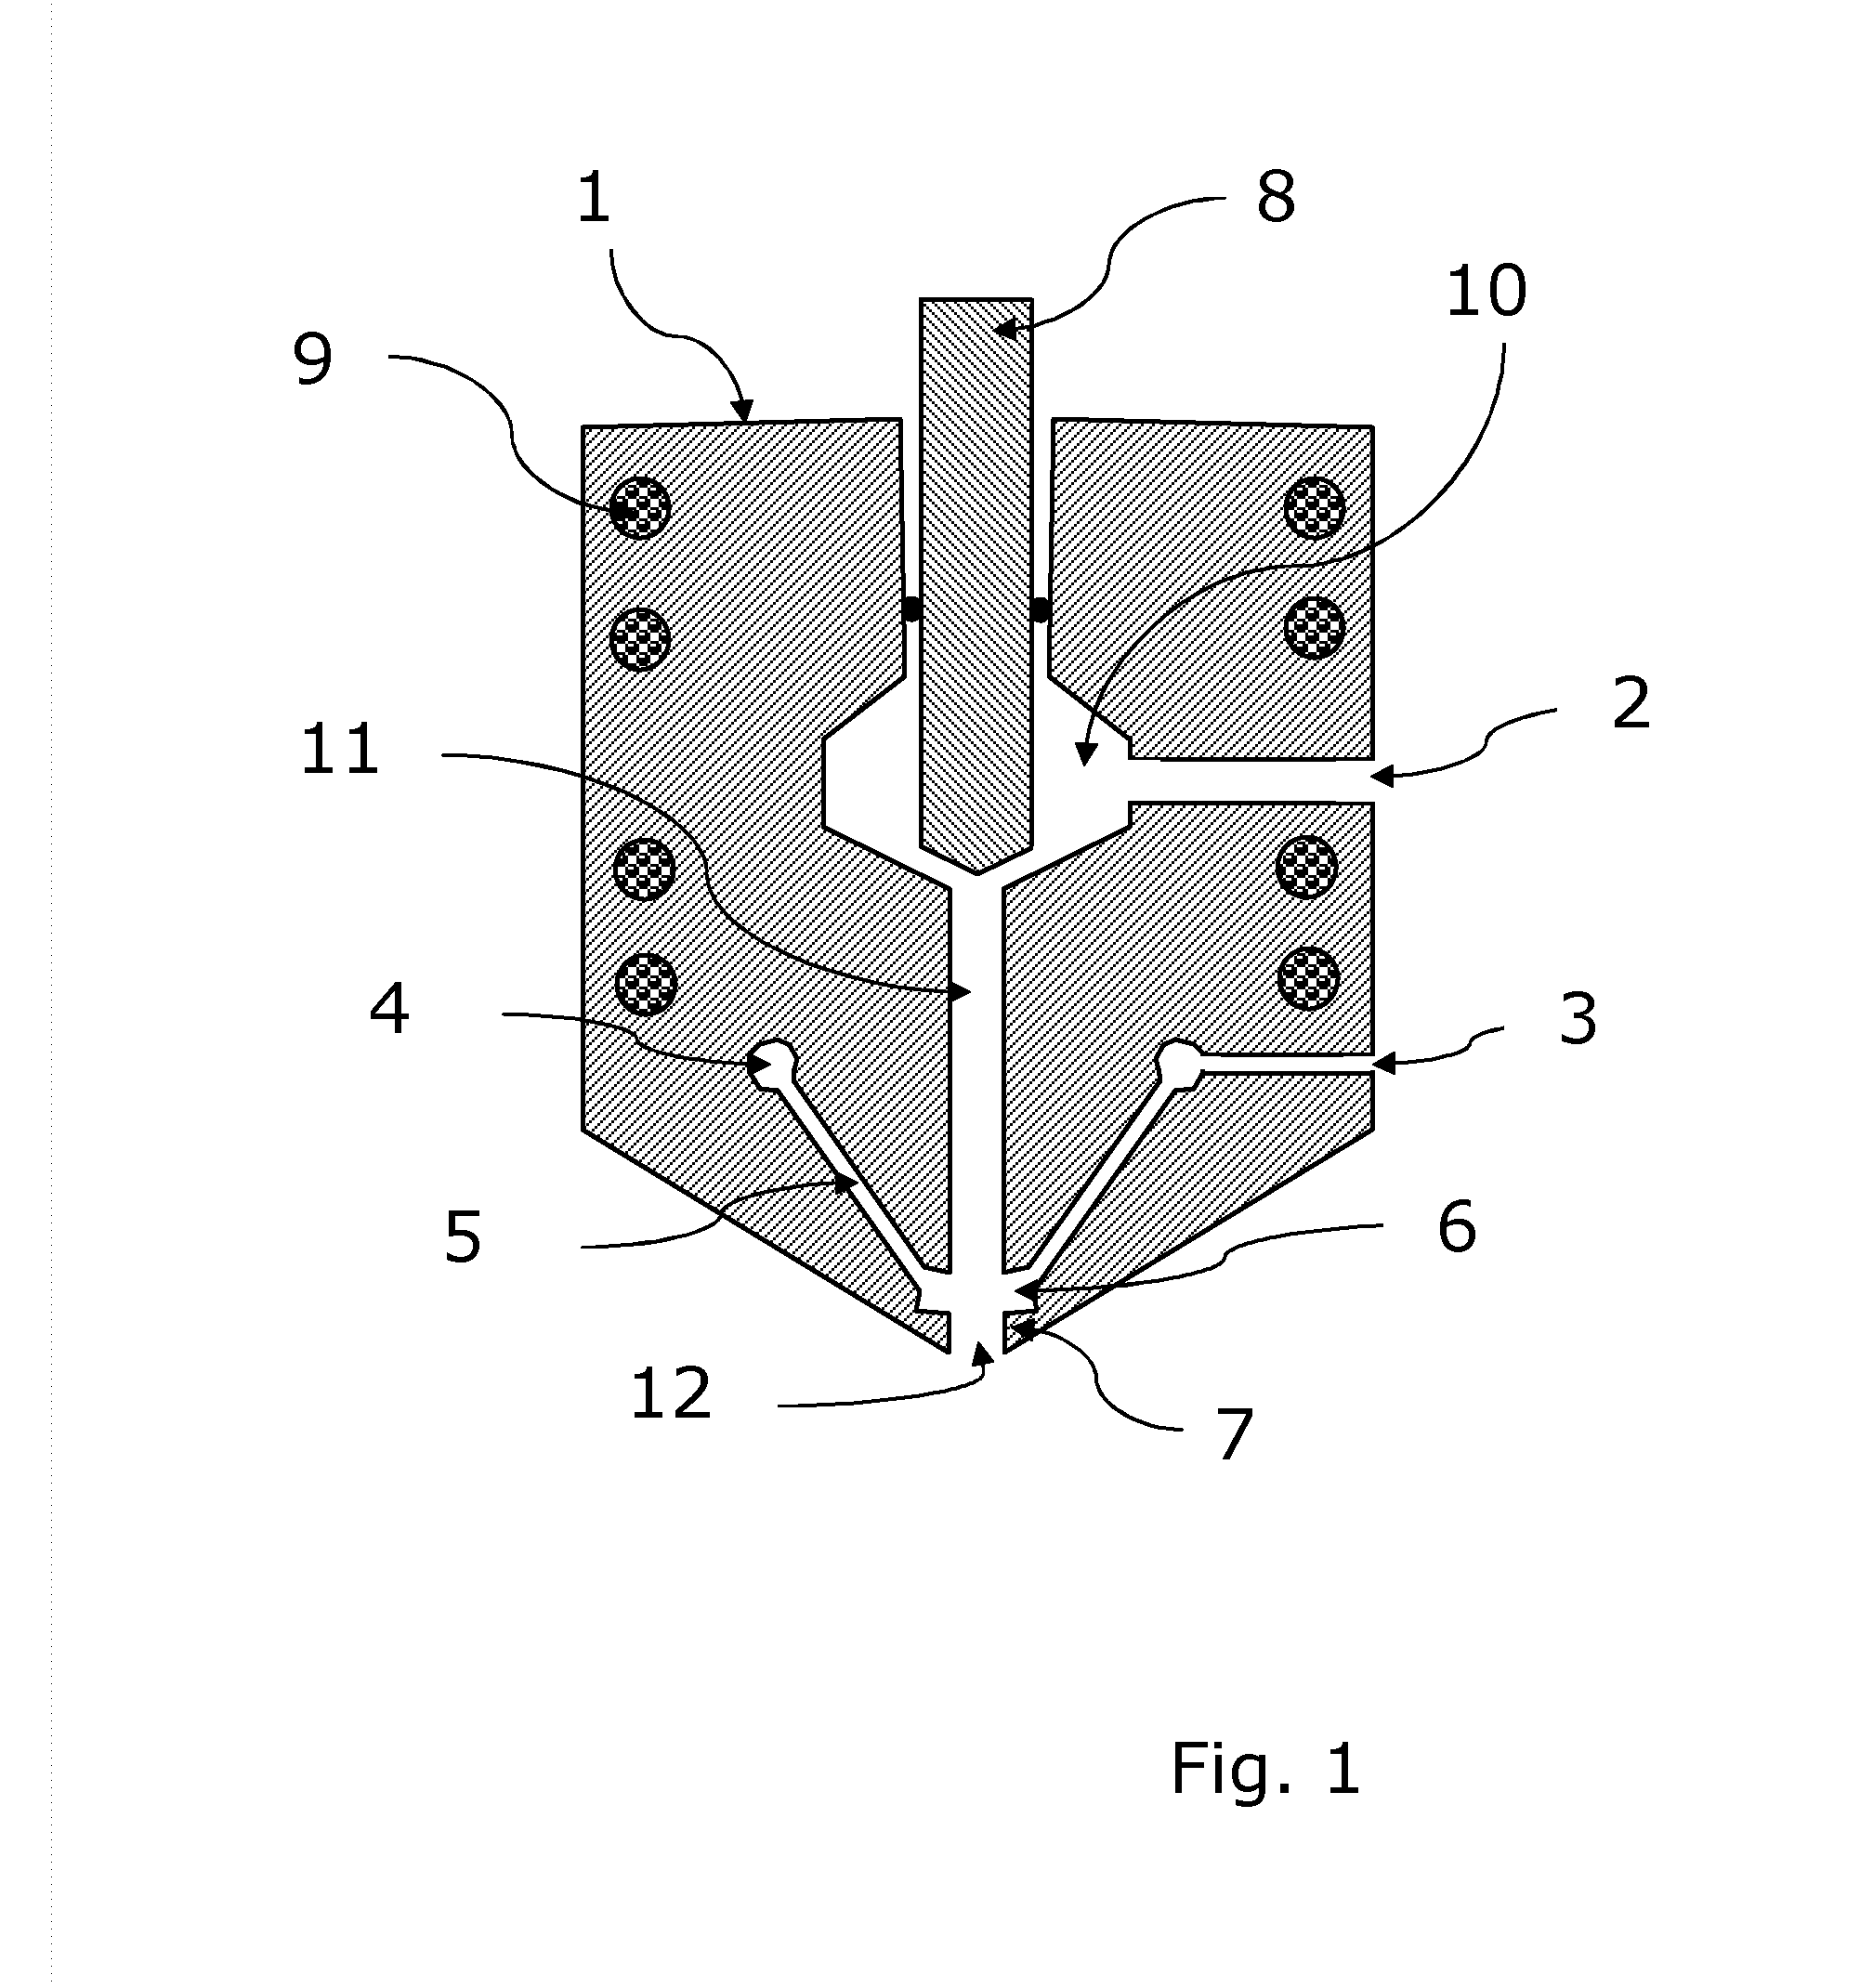 Equipment and method for frozen confectionery product with layered structure having external coating